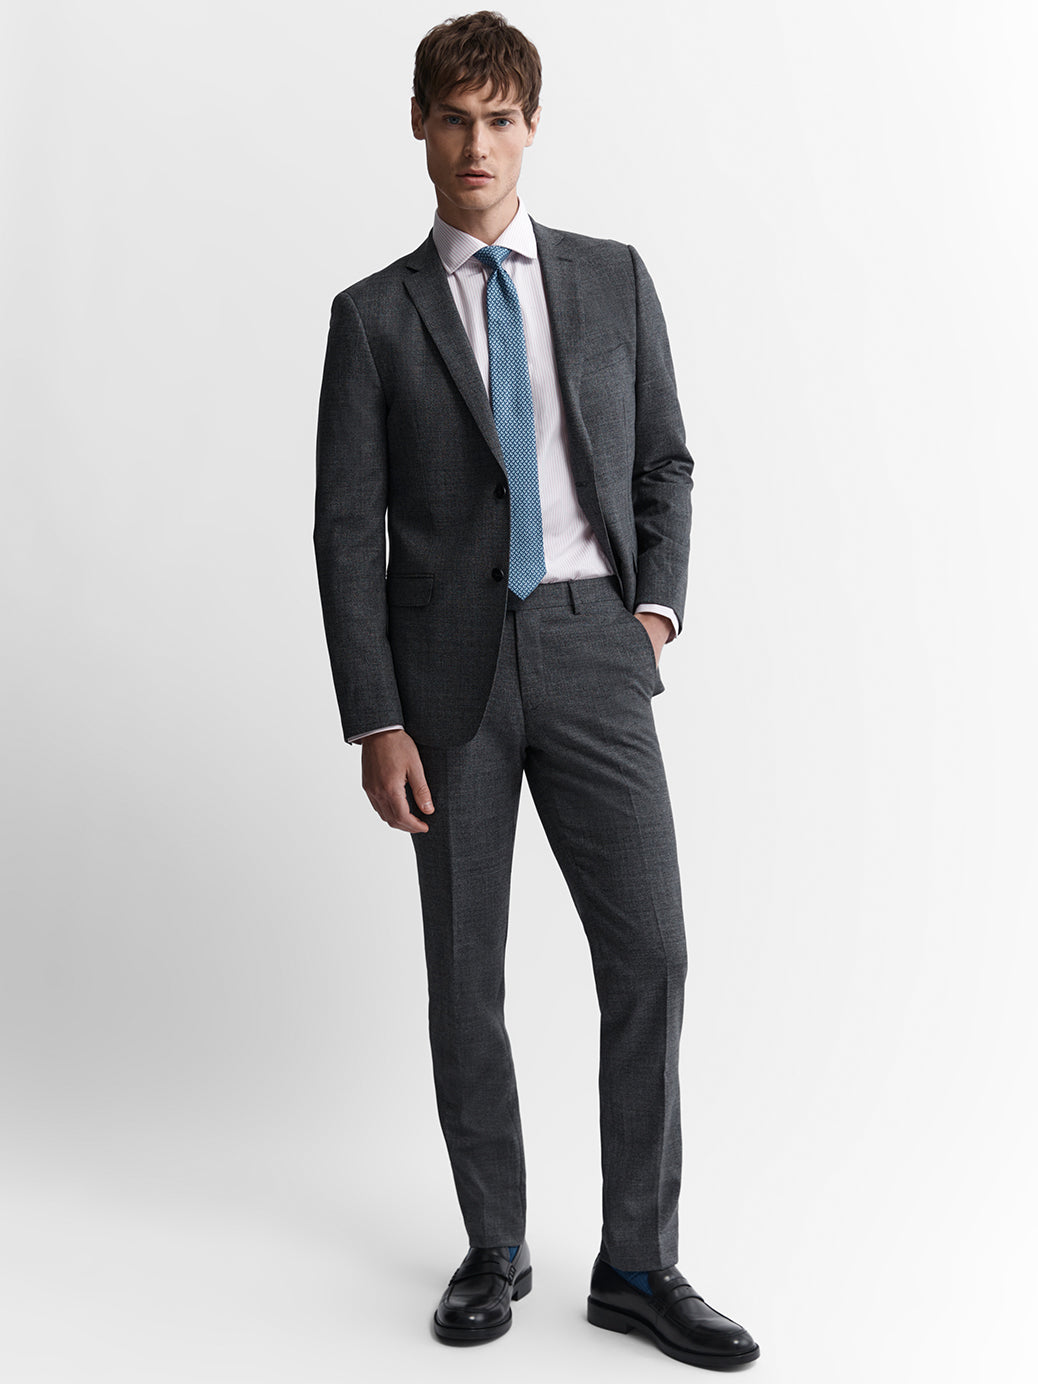 The Suit Fit Guide – tmlewinuk